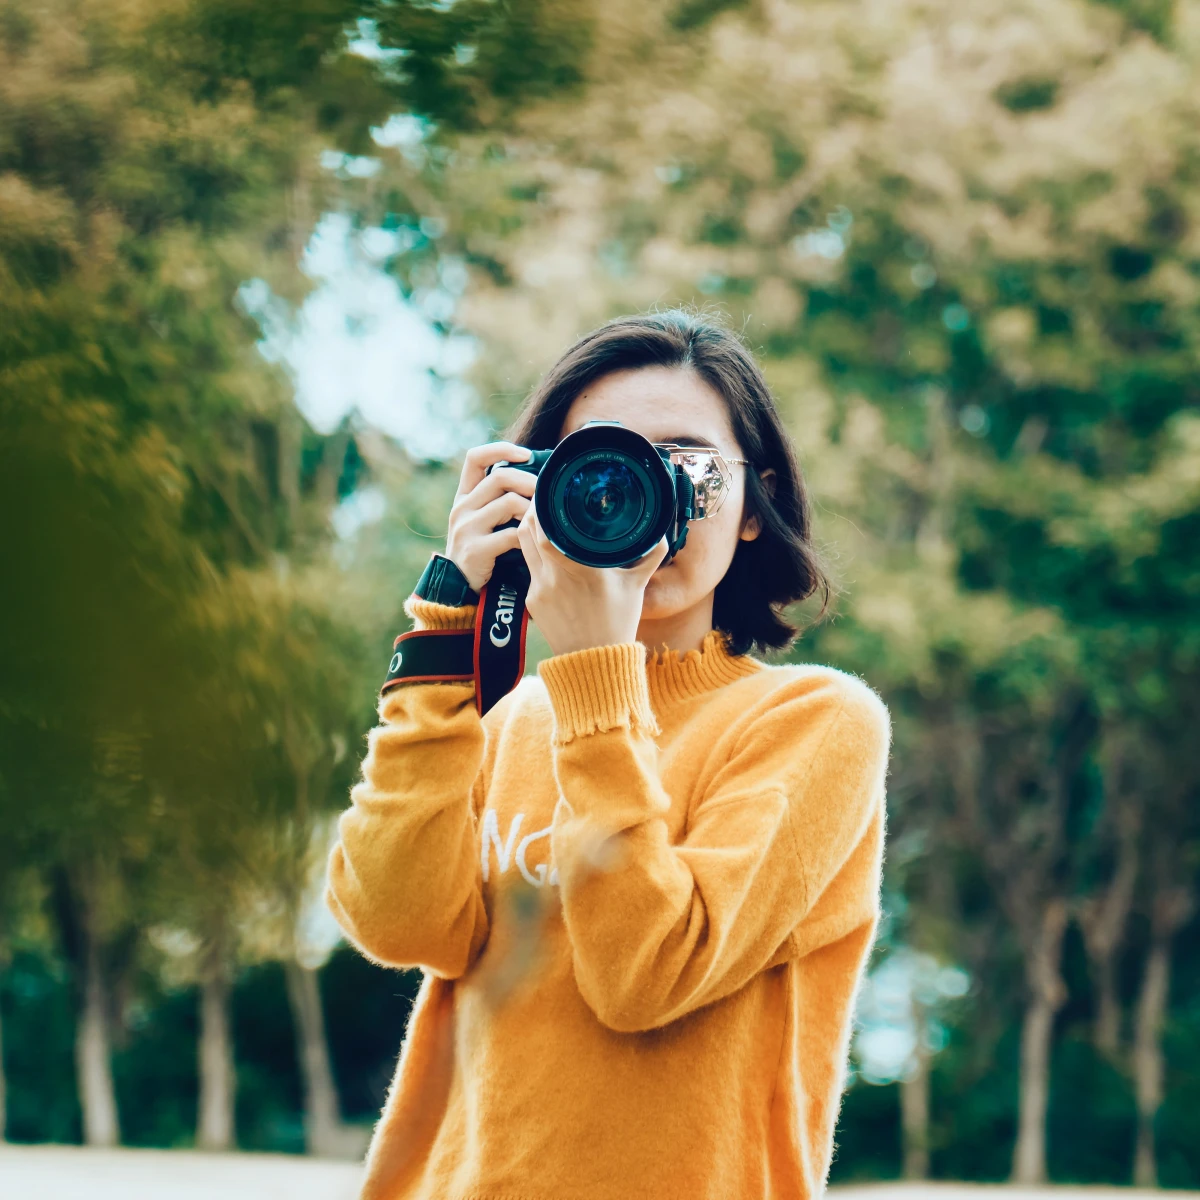 Woman wearing orange sweatshirt holding camera with trees in background